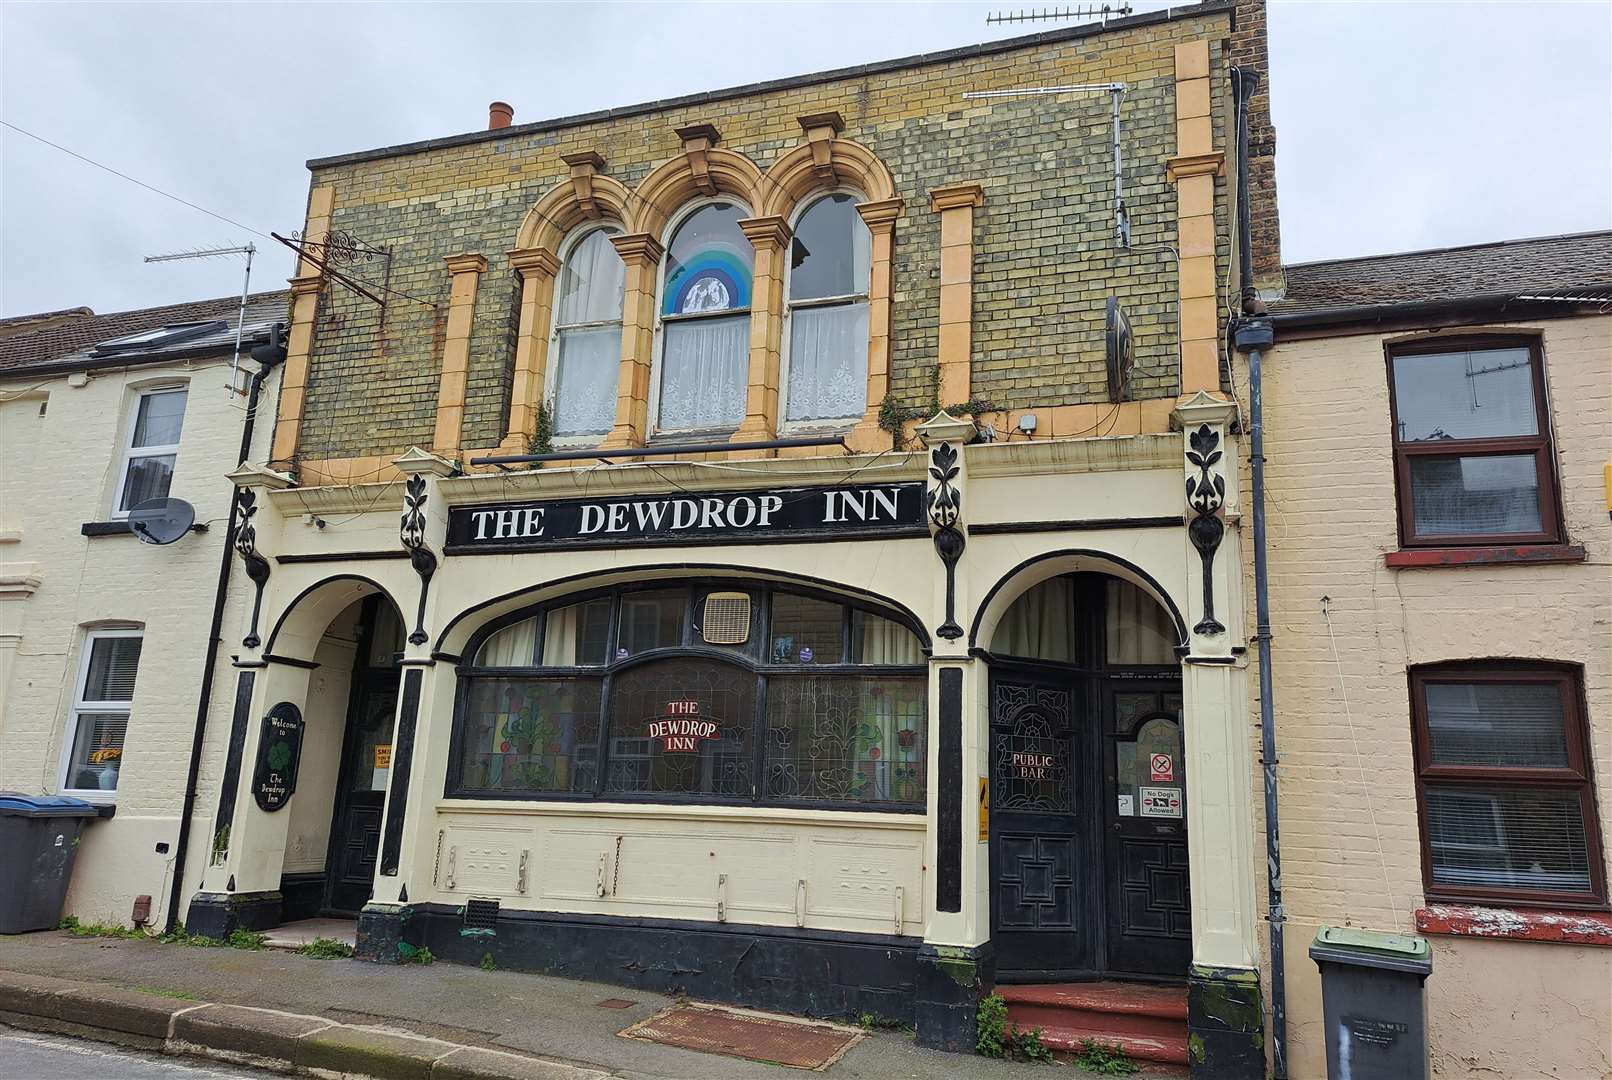 The Dewdrop Inn in Tower Hamlets Street, Dover, is to be converted into a 12-bed HMO